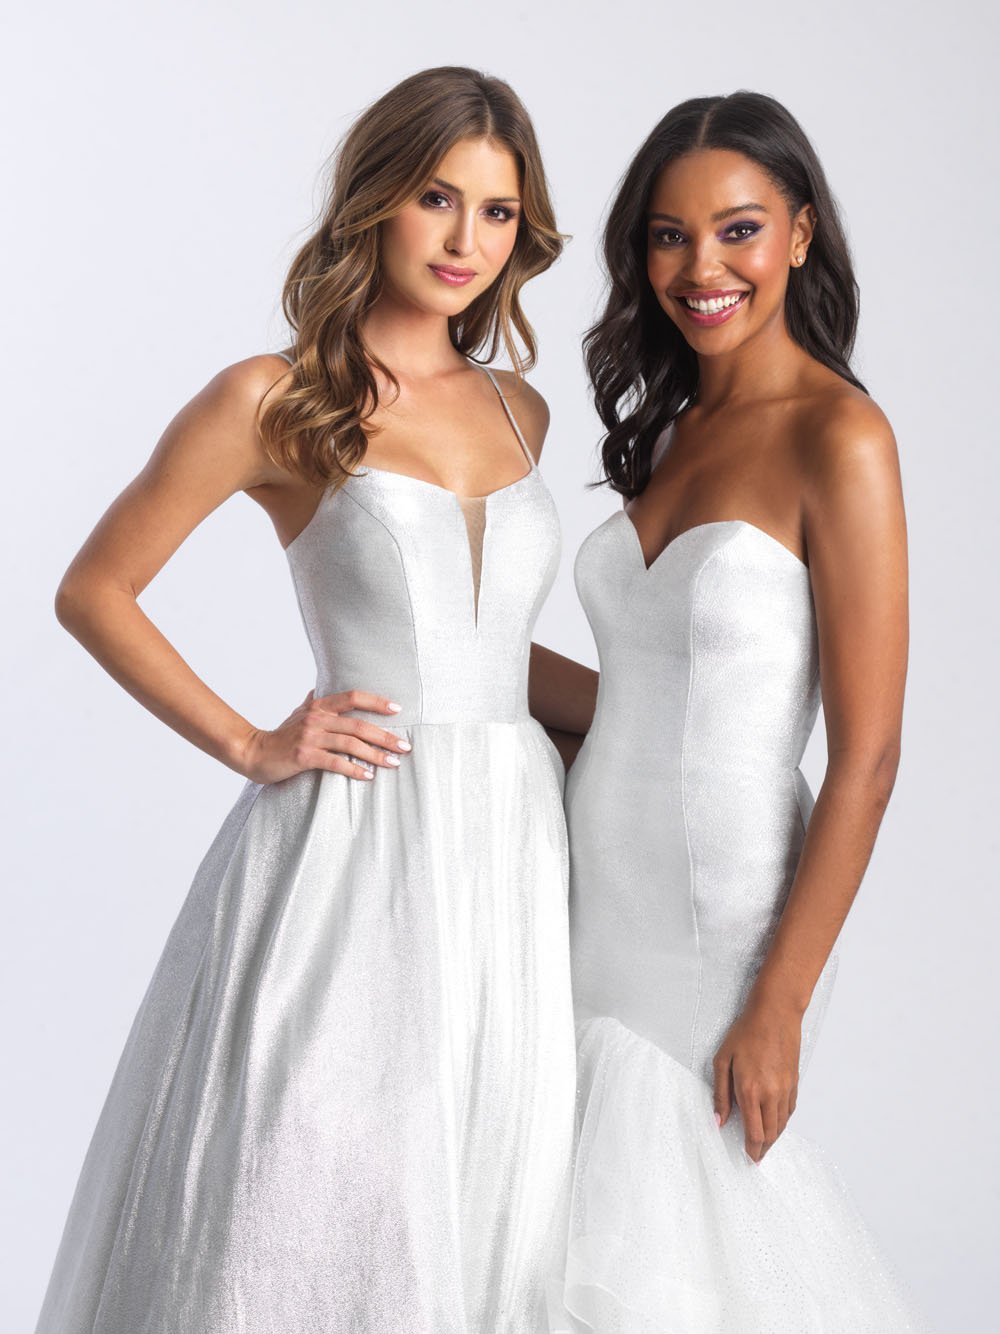 Madison James 20-310 dress images in these colors: Silver.